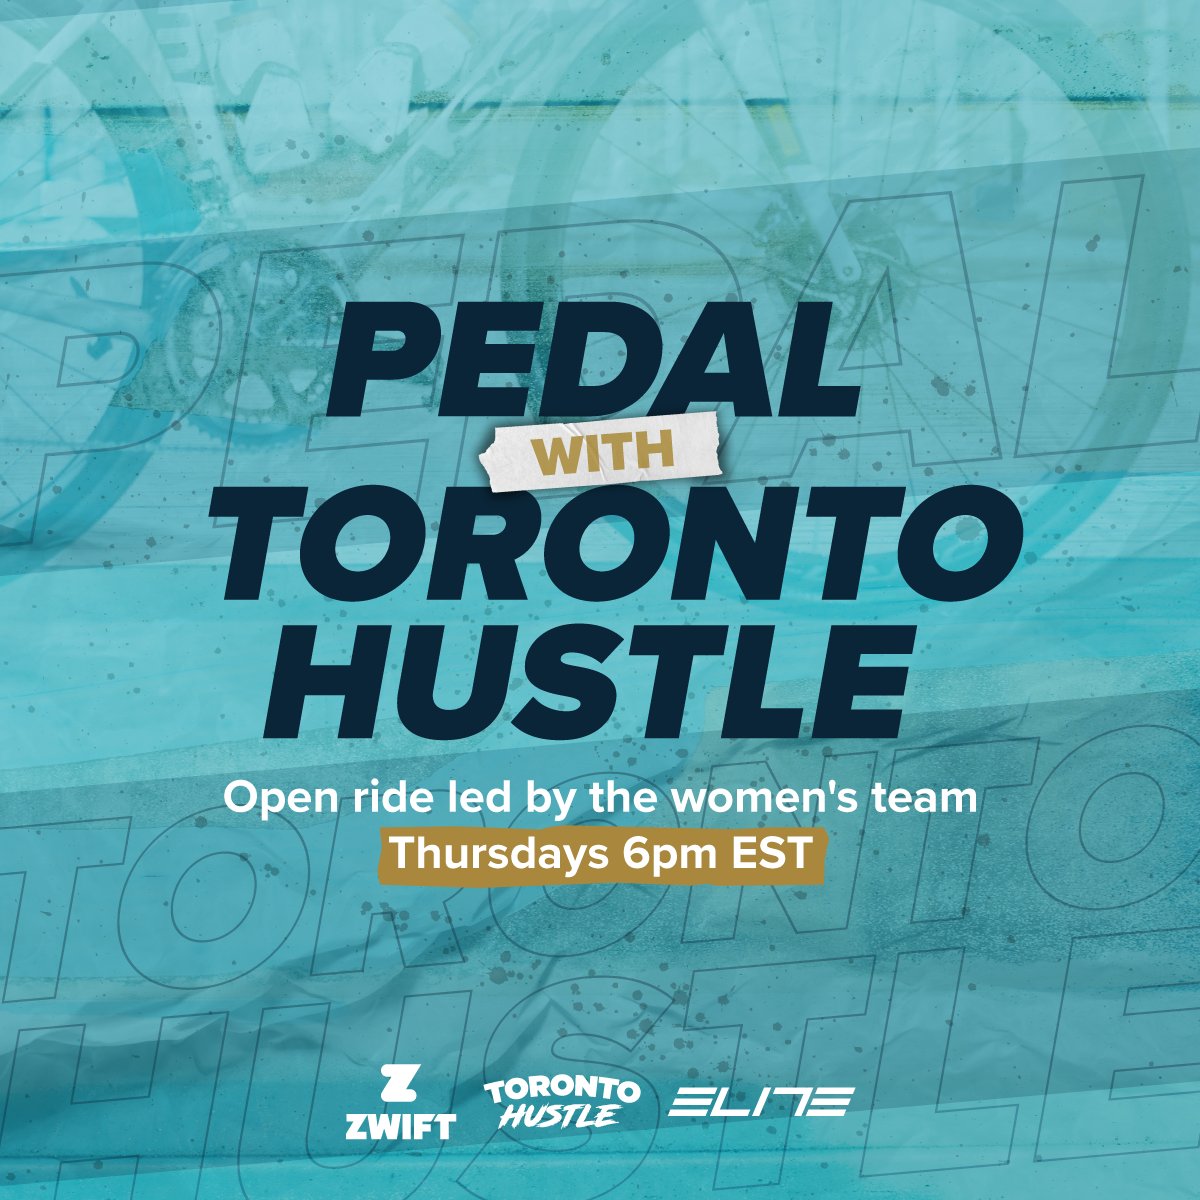 test Twitter Media - Happening TOMORROW!
Our weekly spin led by our women's team gets underway on @GoZwift 🎉
Come join us - 6pm EST
 https://t.co/wcjsDGuEoh

#gozwift #rideon #paincave https://t.co/cz8iGWoKVg